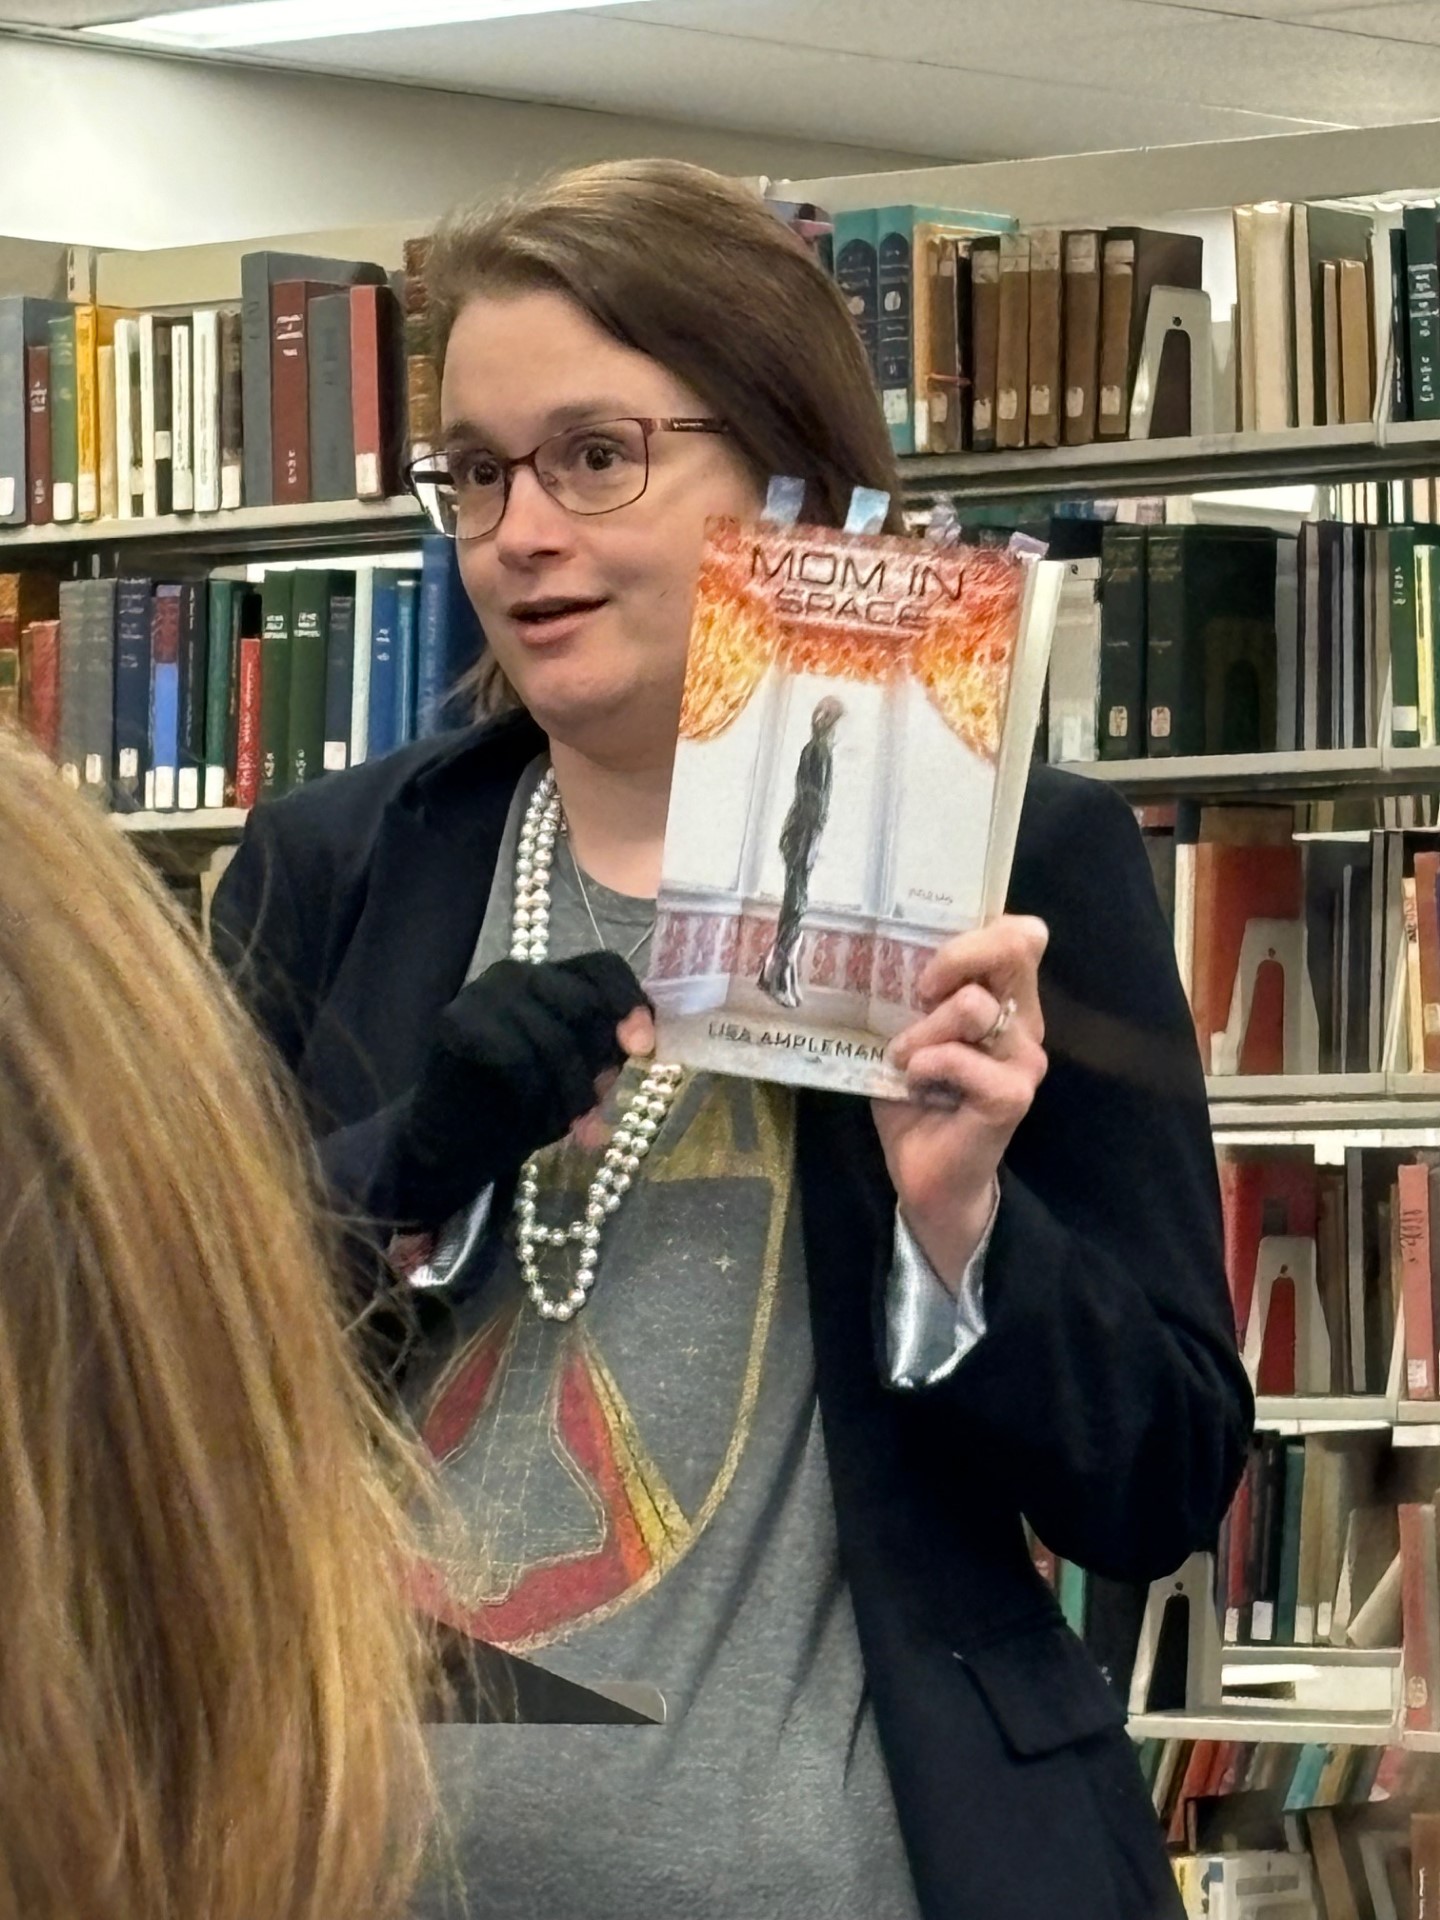 Lisa Ampleman, a white, brown-haired woman in glasses, blazer, NASA tee shirt, and string of pearls, holds her book, MOM IN SPACE, up as she speaks to the audience at Poetry Stacked. She stands in front of a large bookcase filled with books.